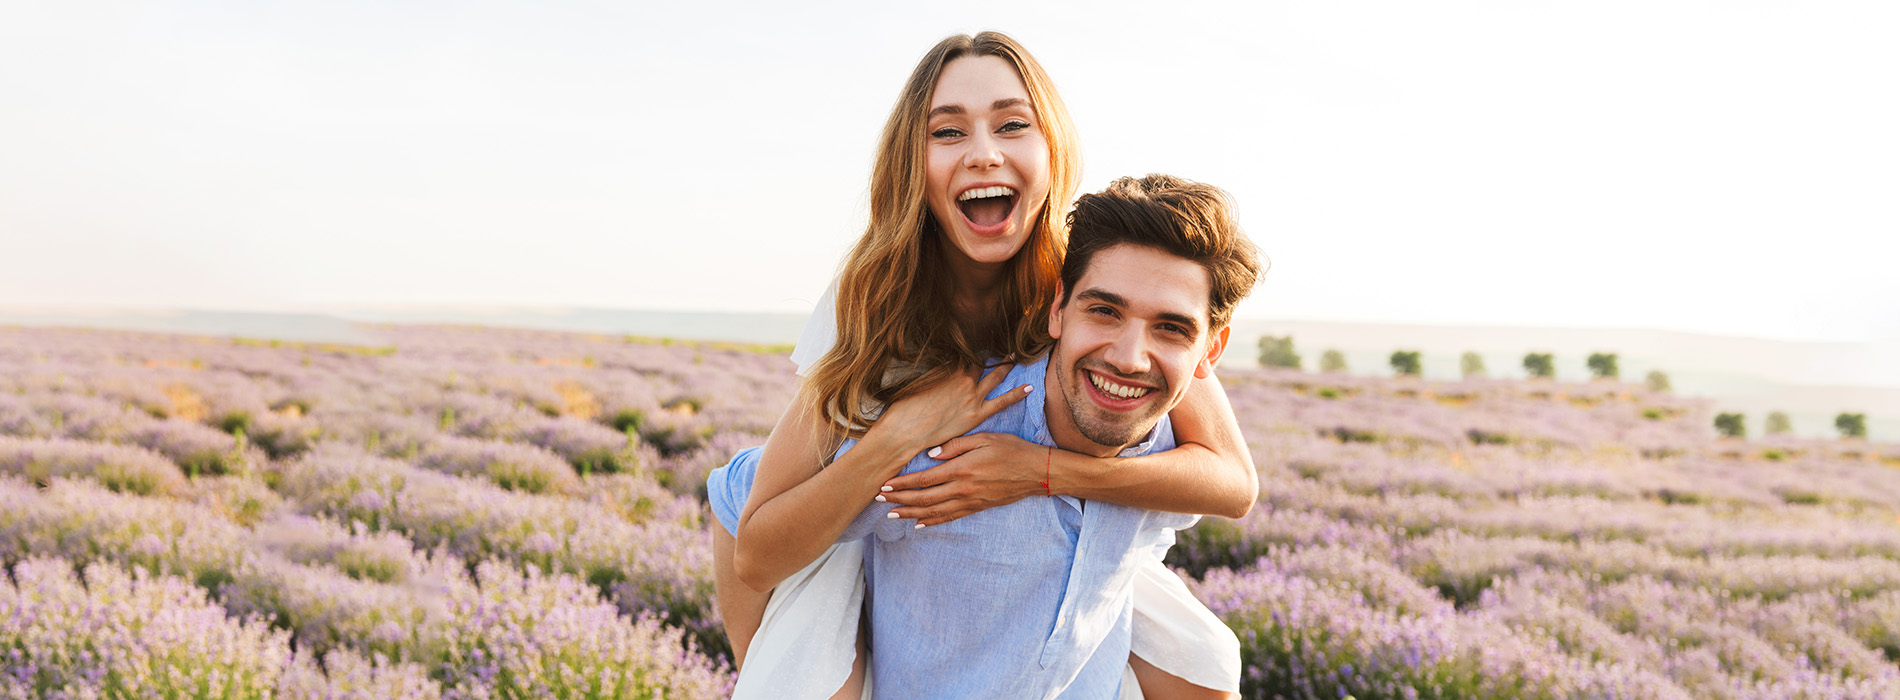 Two people, likely a couple, embracing and smiling at the camera in a field with lavender plants.